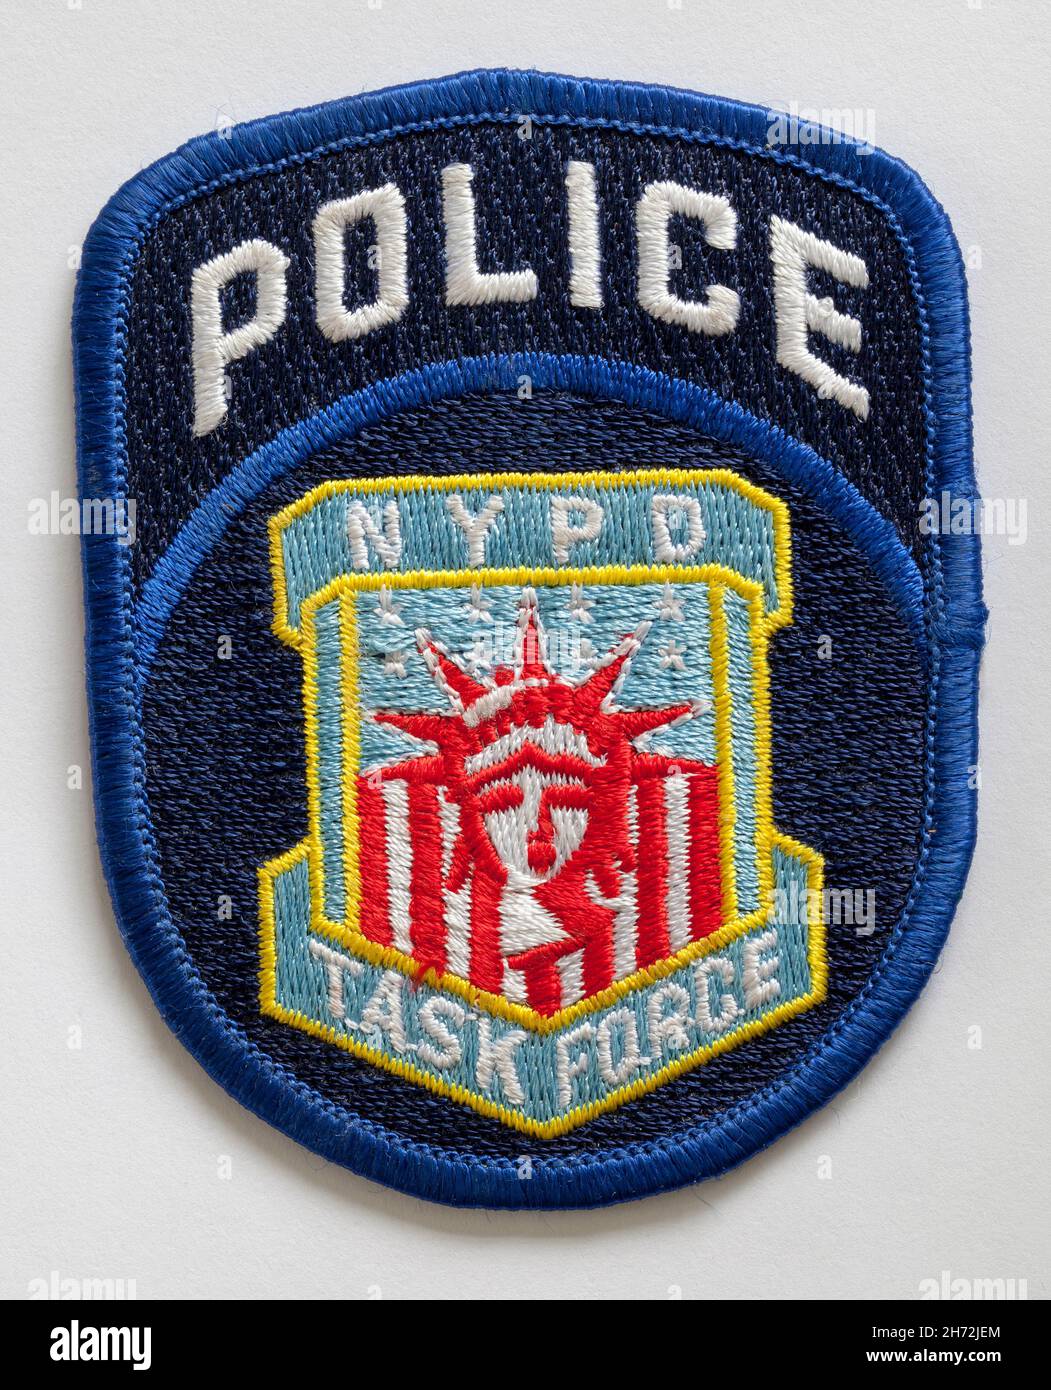 NYPD Vintage Official New York City Police Department Captain Patch NEW